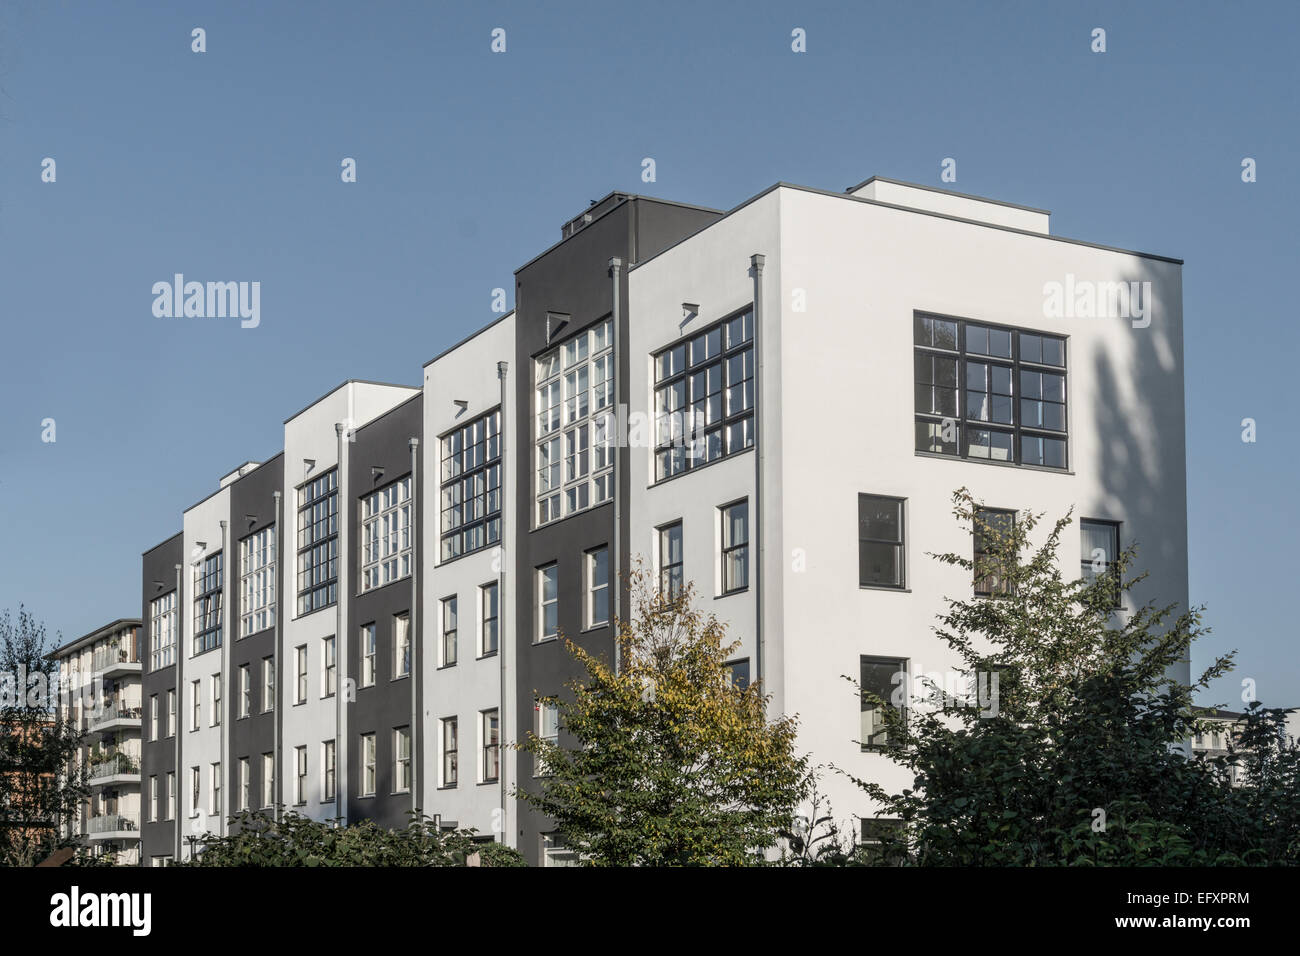 Modern Architecture, Real Estate, Town House, Rummelsburger Bucht, Berlin, Germany Stock Photo